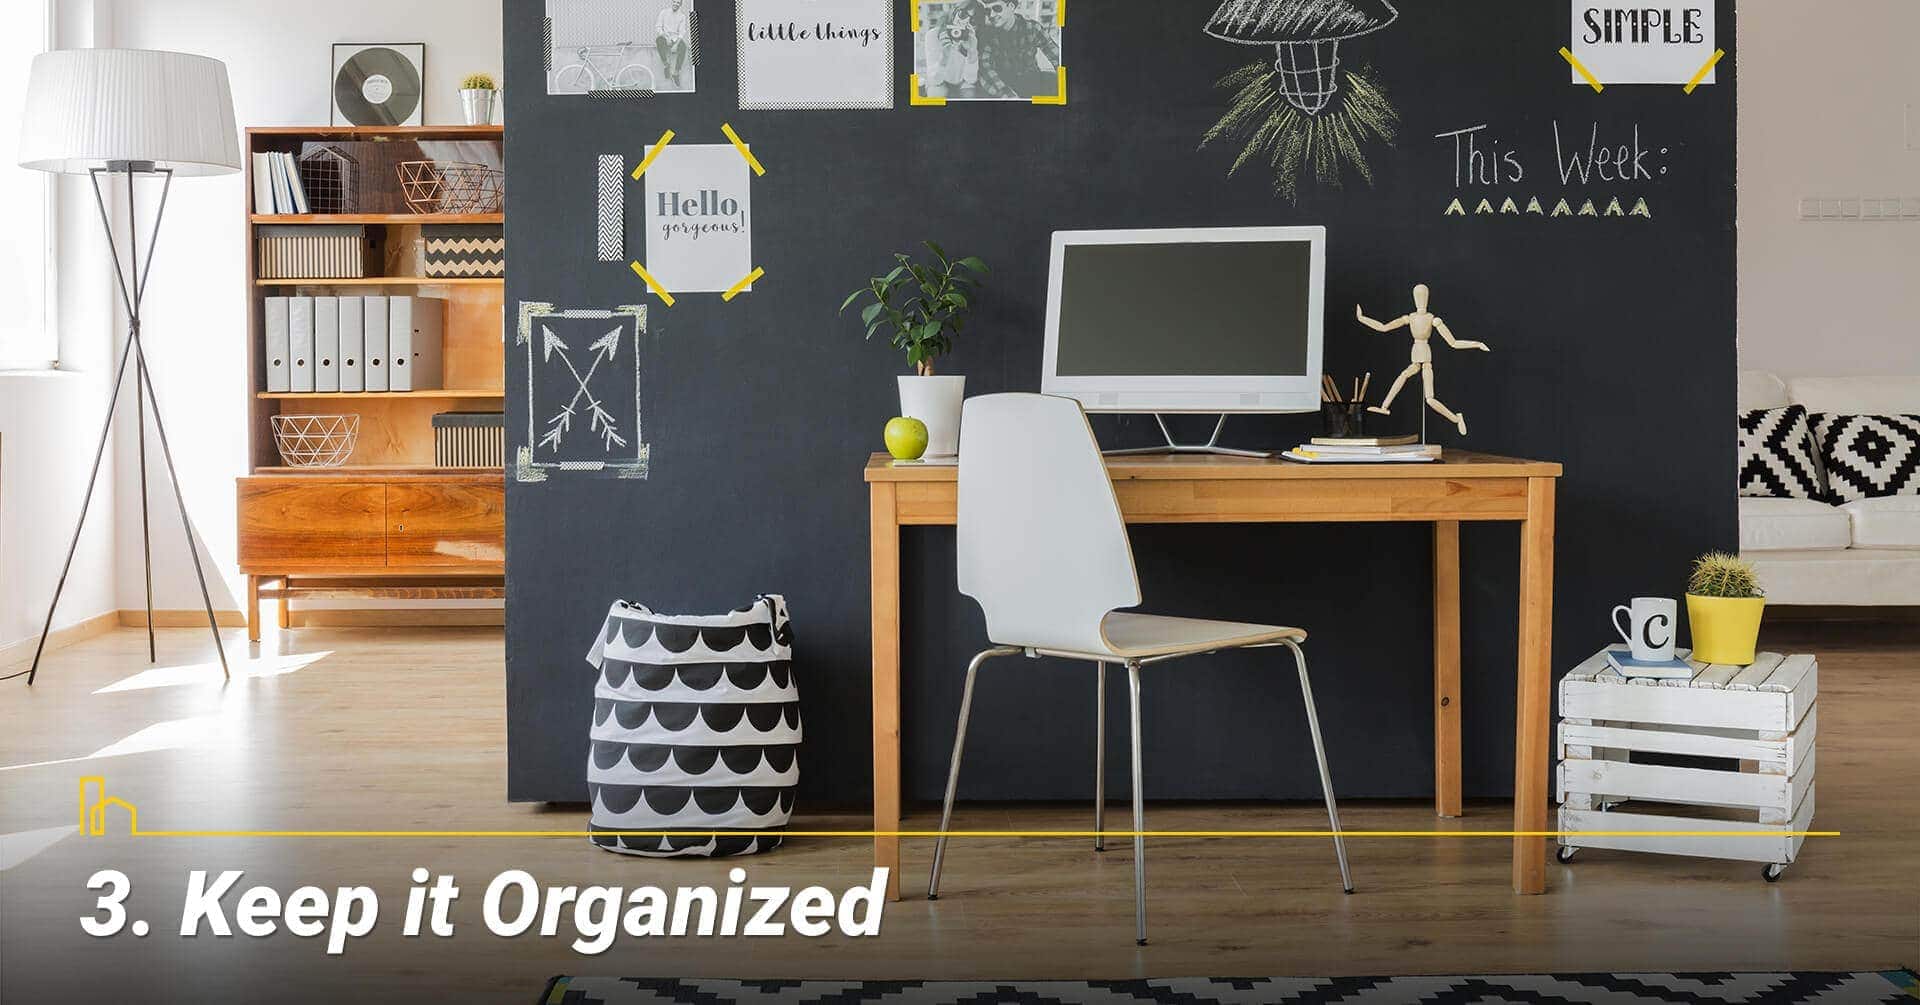 Keep it Organized, organize your place